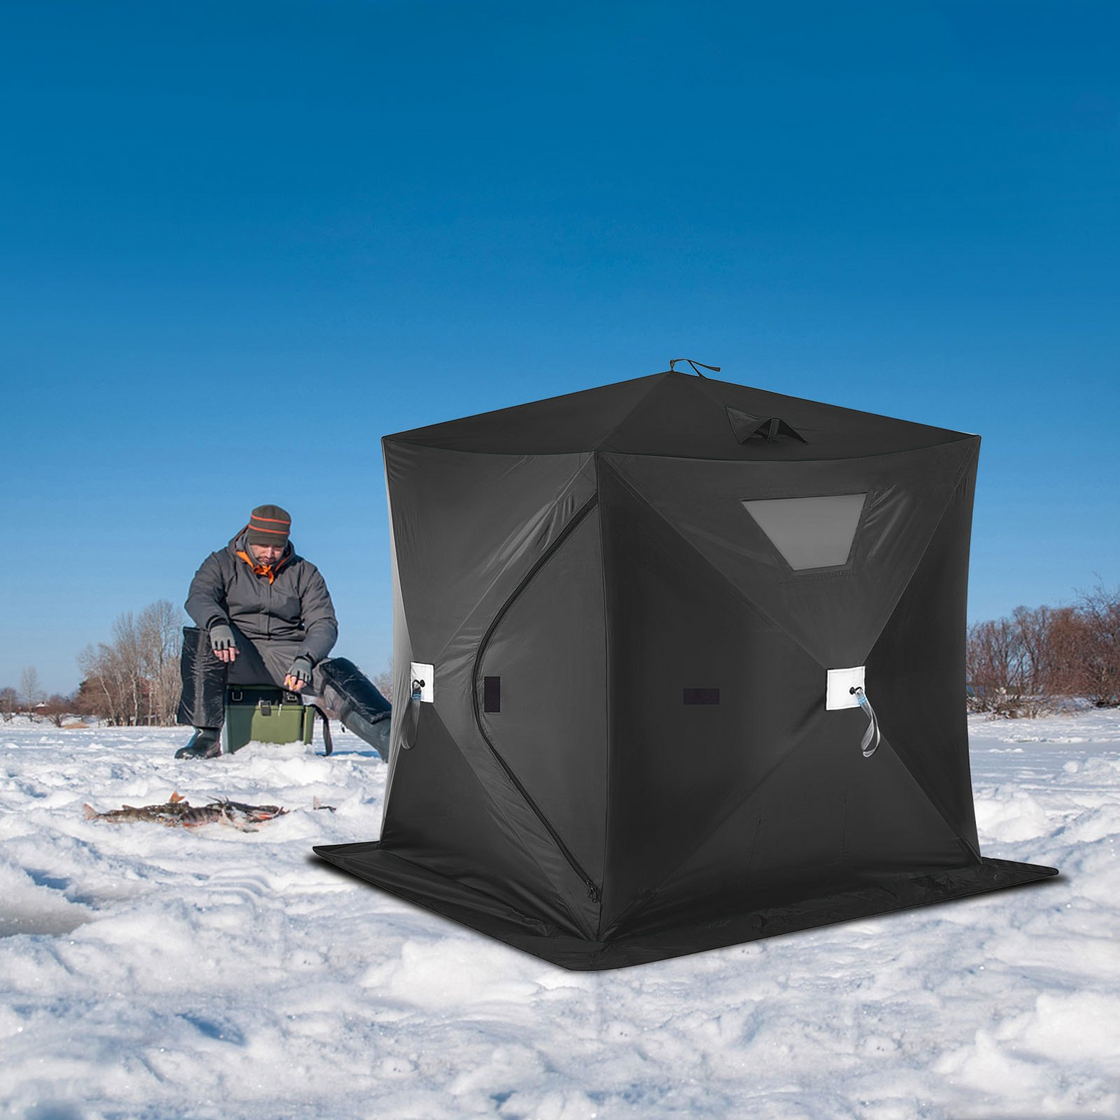 VEVOR 2-3 Person Ice Fishing Shelter, Pop-Up Portable Insulated Tent